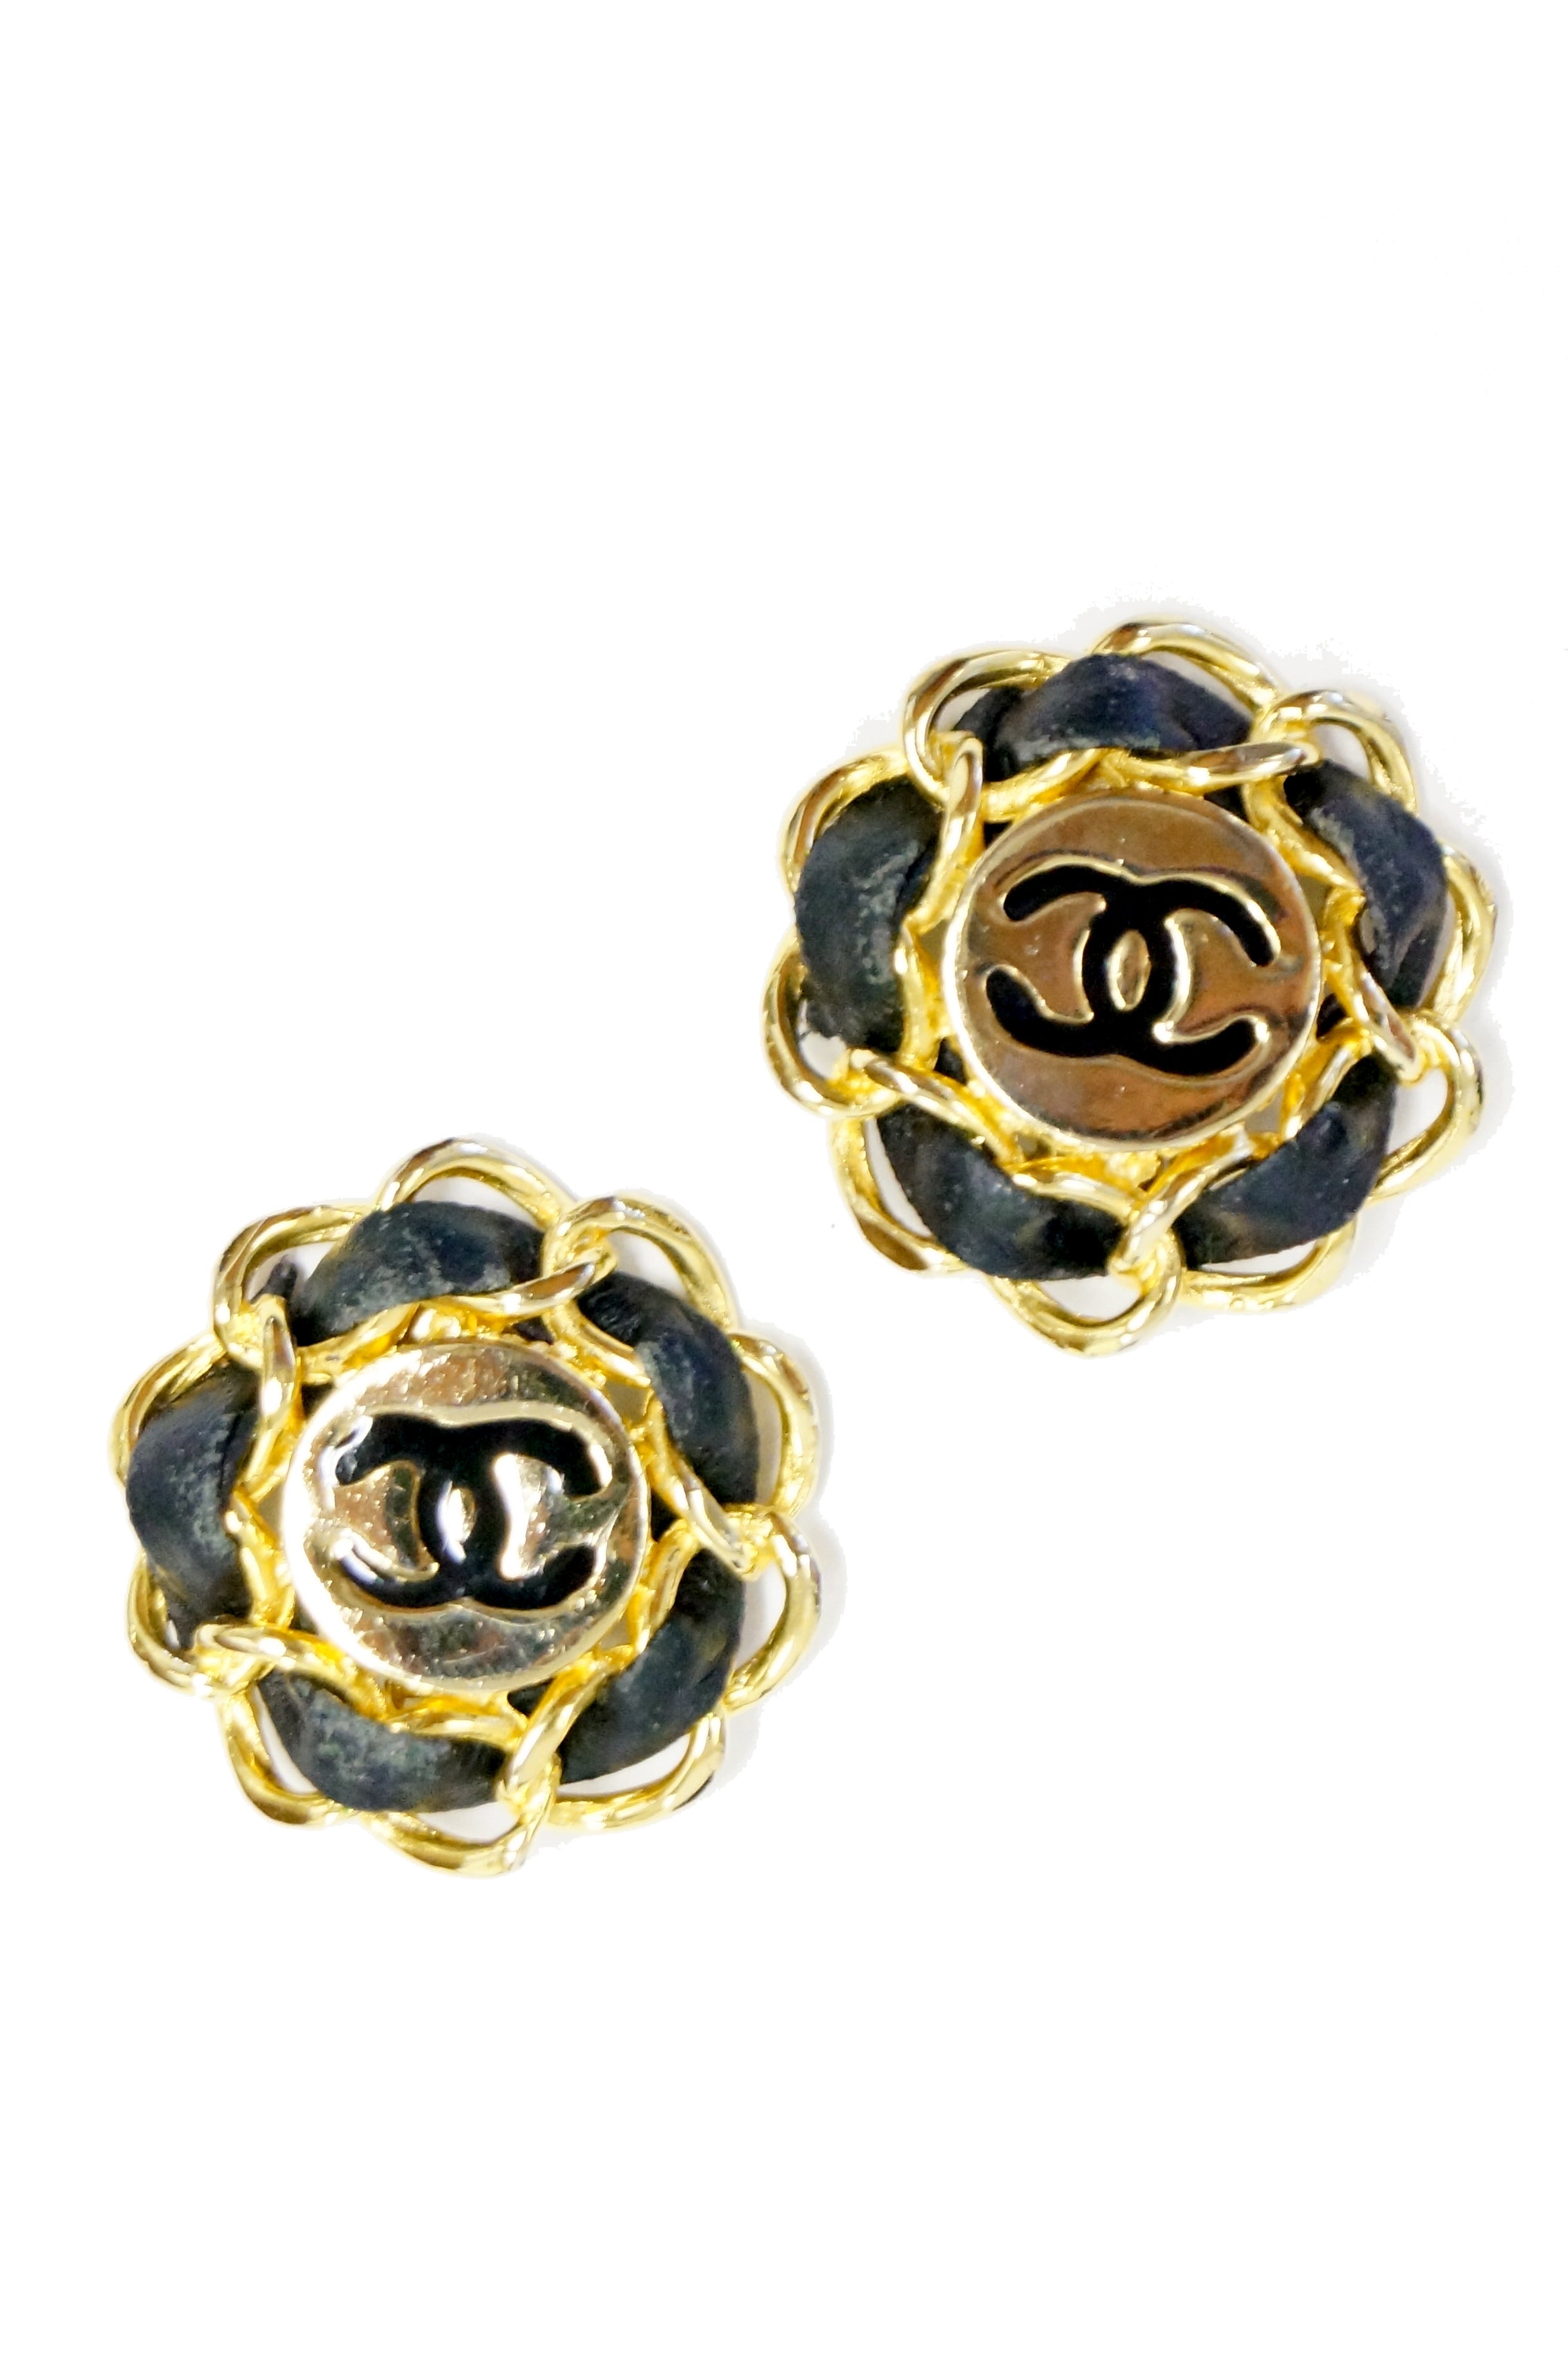 Chanel vintage diamond ear clips - 1980s second hand Lysis